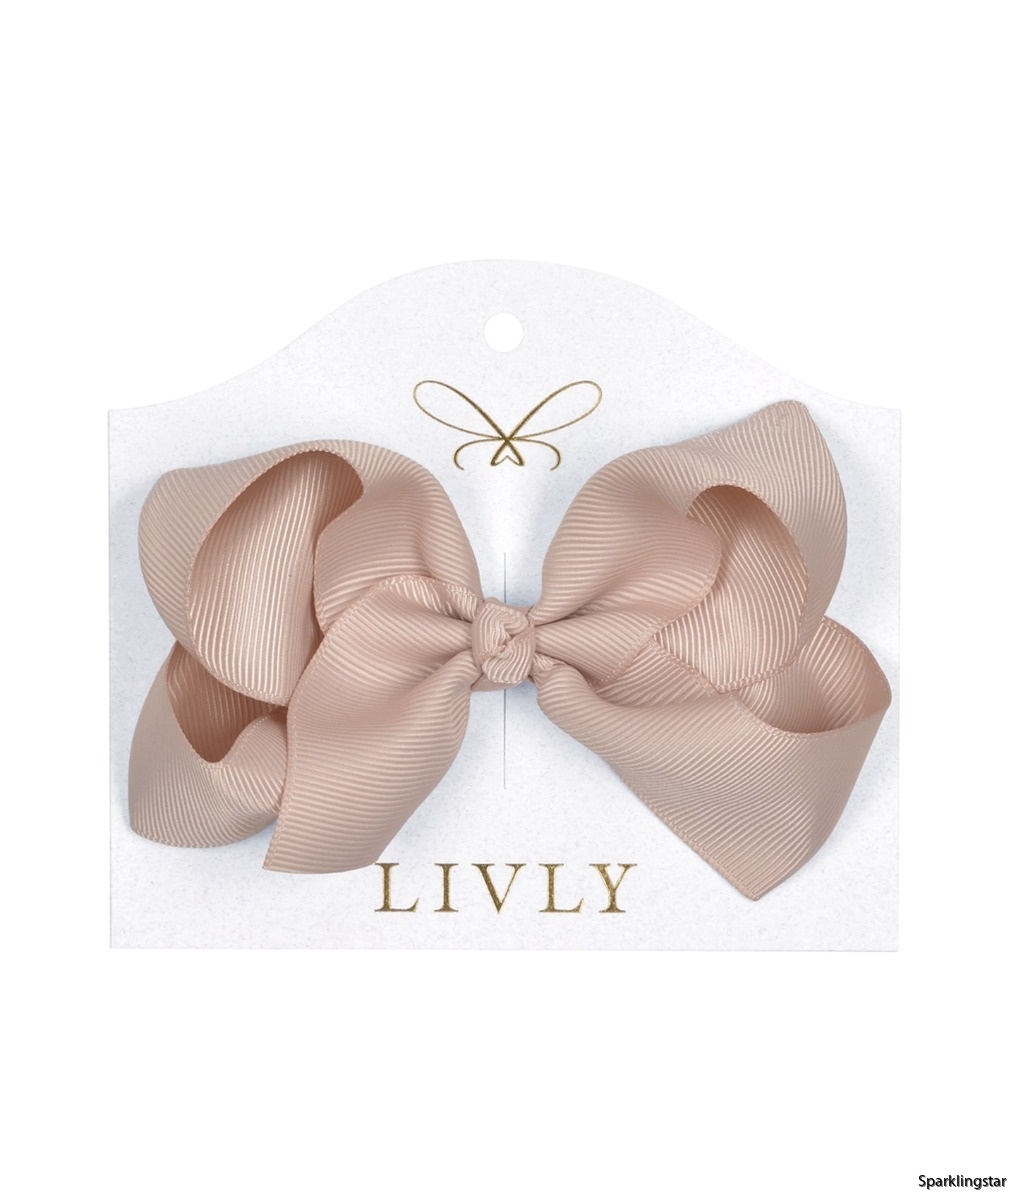 Livly Large Bow Mademoiselle